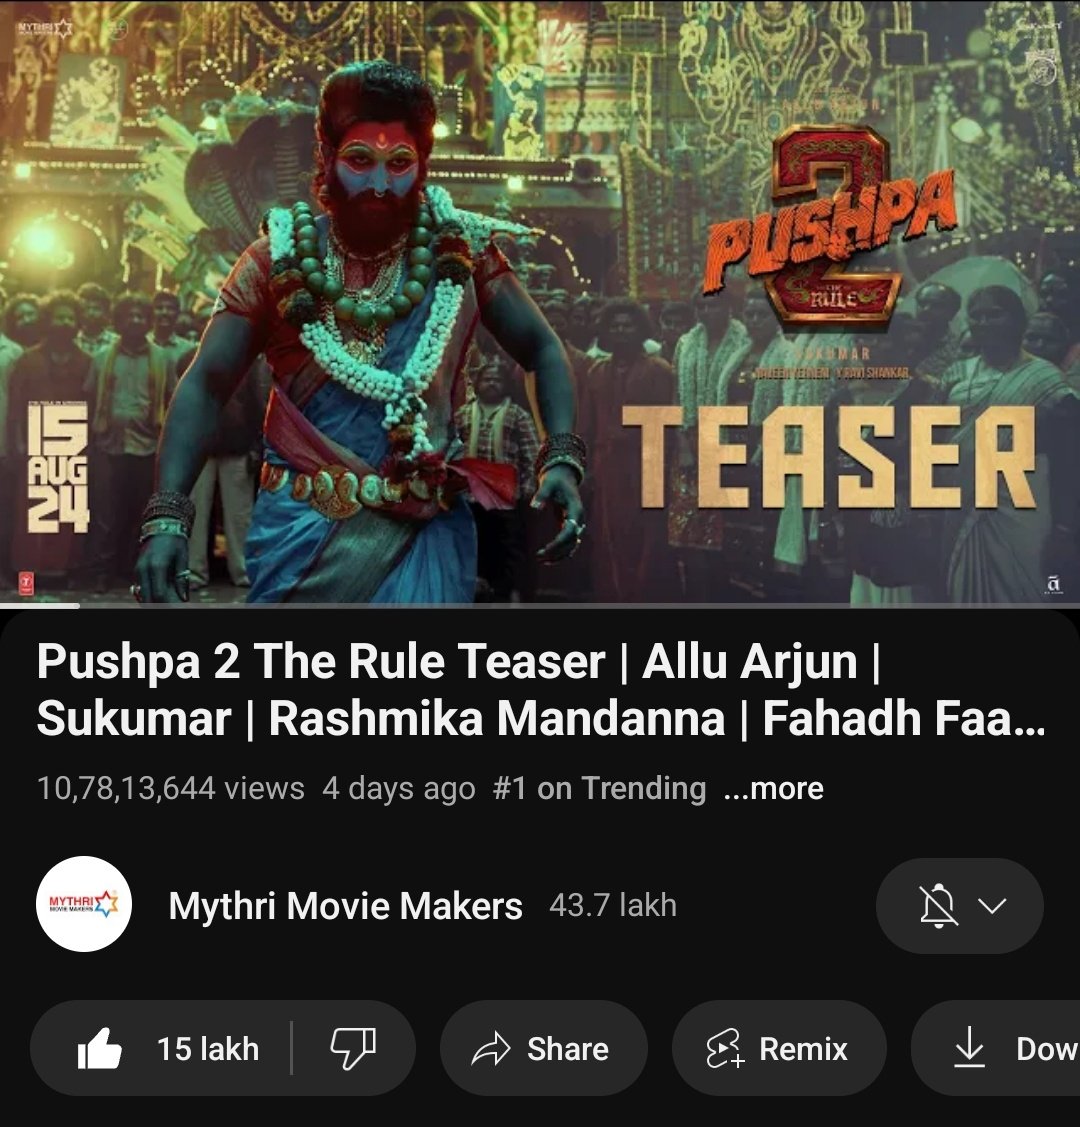 #Pushpa2 Teaser dominating every video on youtube & Trending at #1 for '100Hours' & counting! 🙏🔥

HAIL GOAT @alluarjun 🛐
youtu.be/wboGYls1Bns?si…
#Pushpa2TheRule @PushpaMovie